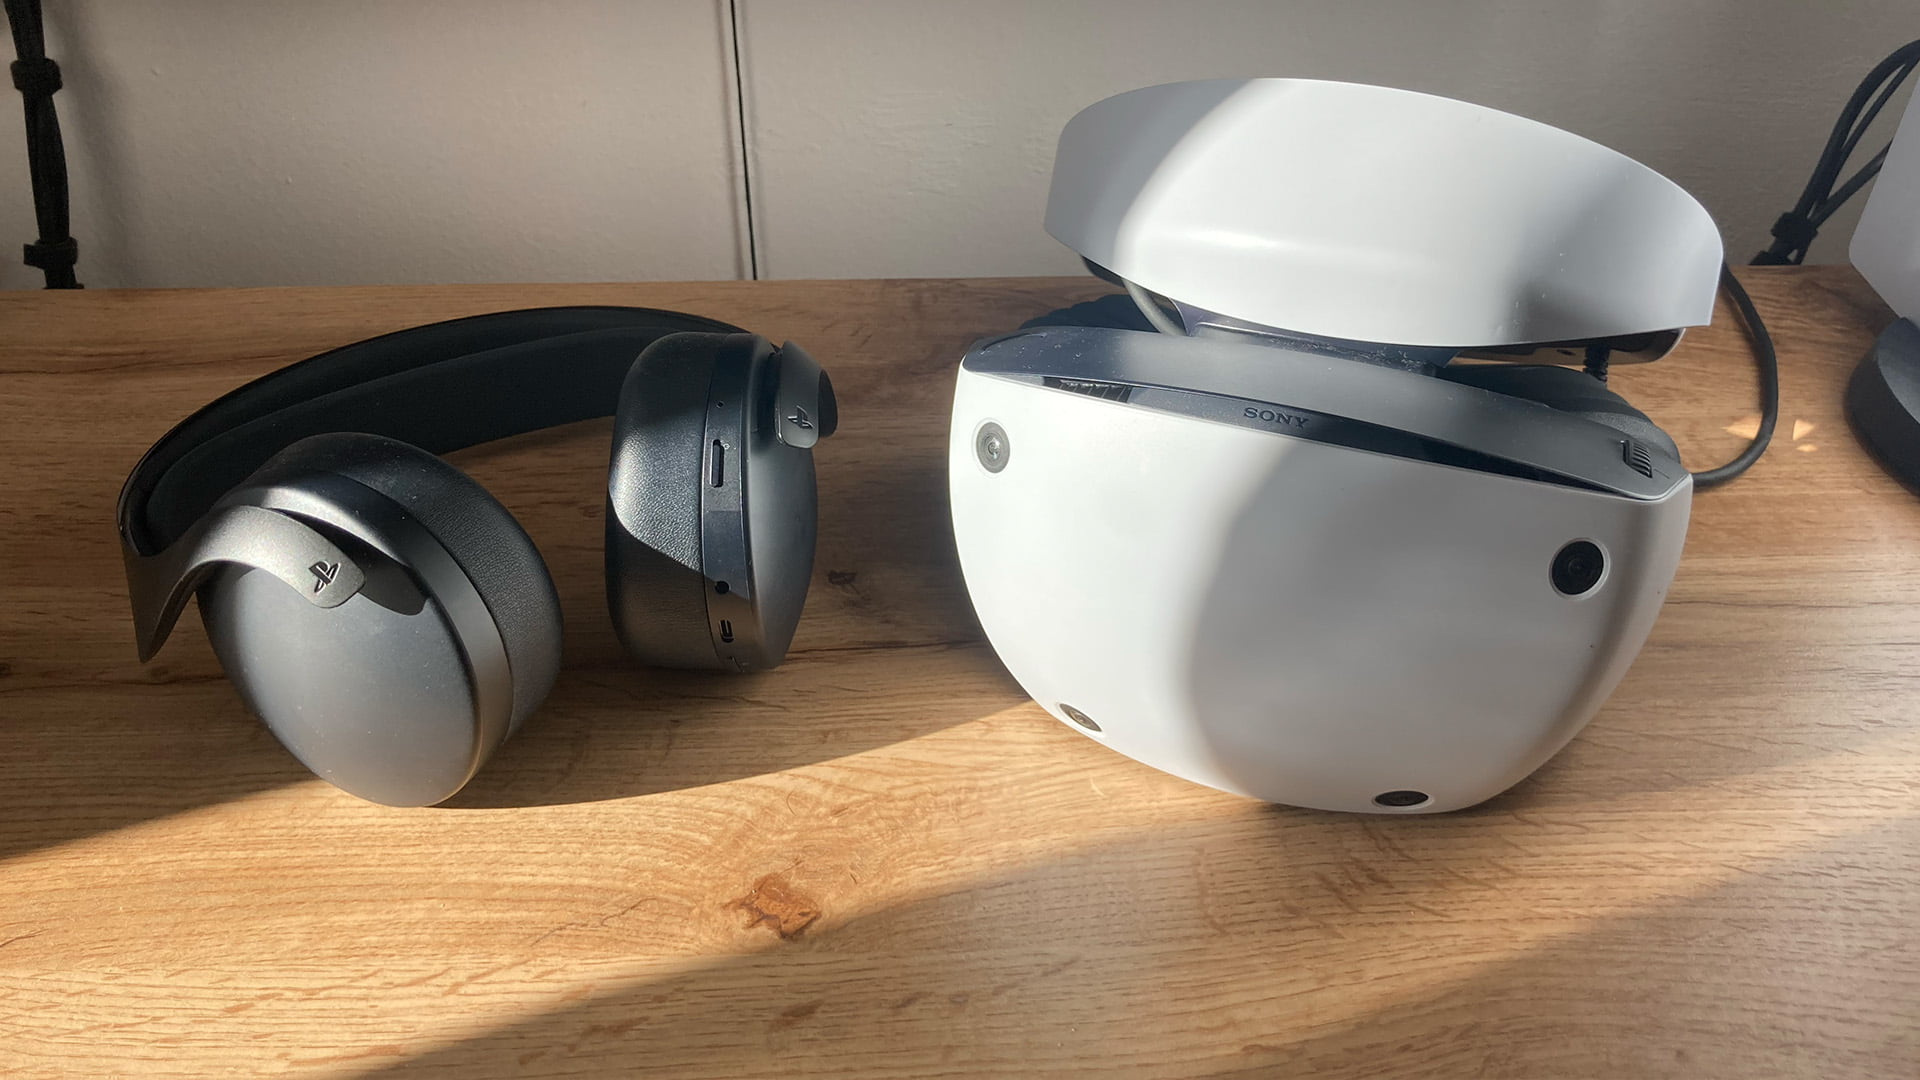 Sony's Pulse 3D headset dramatically improves immersion with PSVR 2